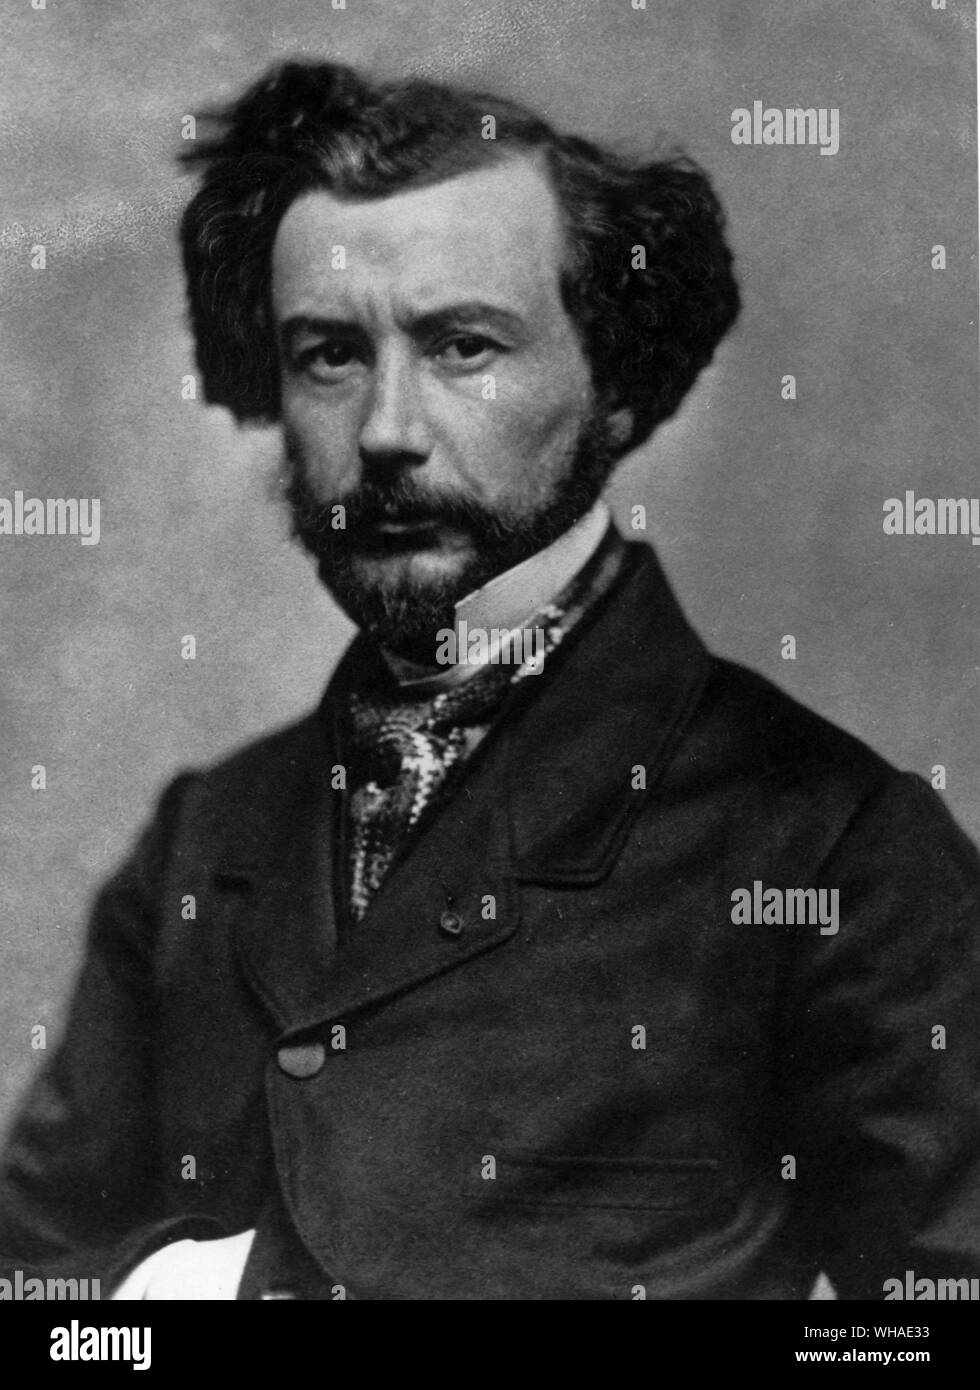 Maxime du Camp 1822-1894. photo by Nadar. French writer and photographer who is chiefly known for his vivid accounts of 19th-century French life. He was a close friend of the novelist Gustave Flaubert. . . An outgoing, adventurous man, Du Camp also pioneered in photography and published works in virtually every literary genre.. Stock Photo